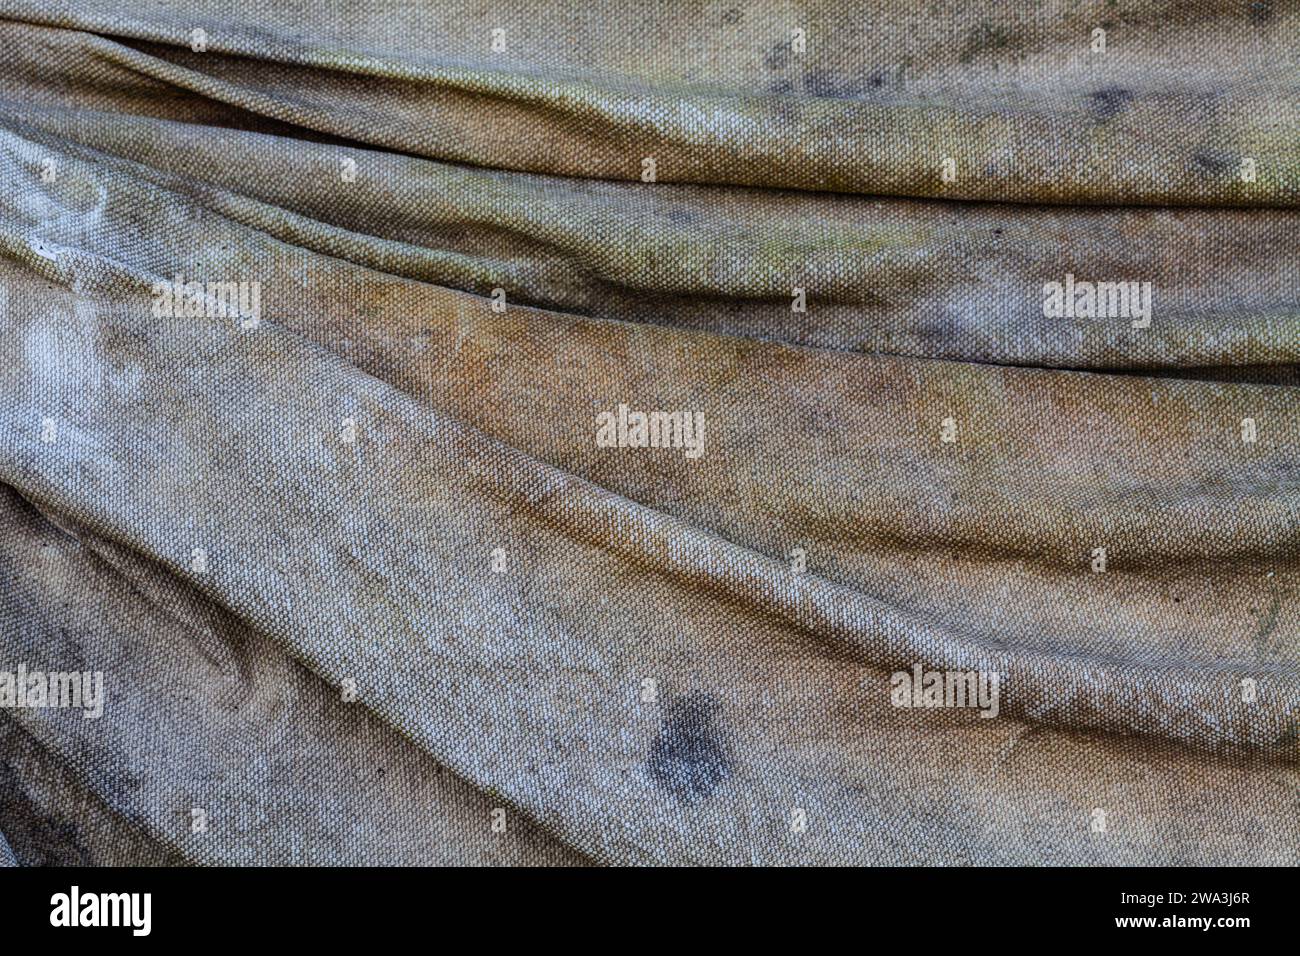 Abstract image of a weathered canvas sheet covering some stored equipment Stock Photo